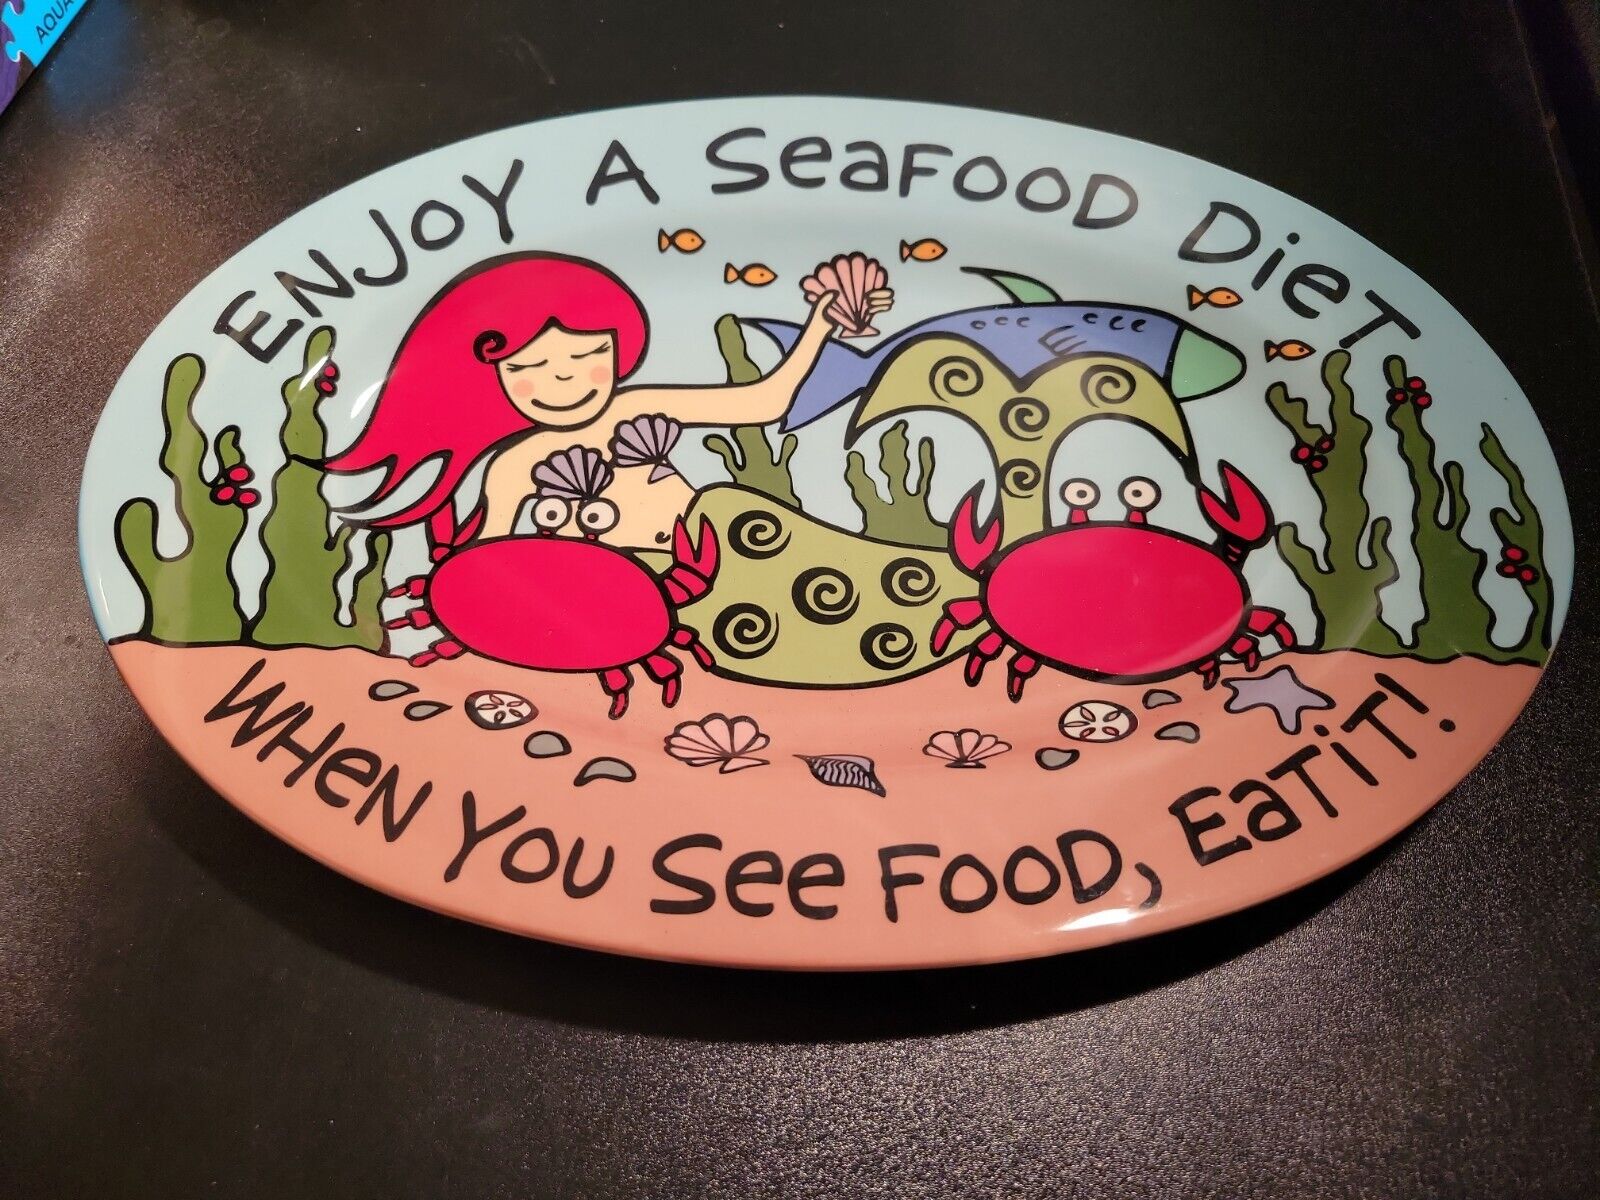 Our Name Is Mud by Lorrie Veasey Seafood Diet Oval Platter 13.5”